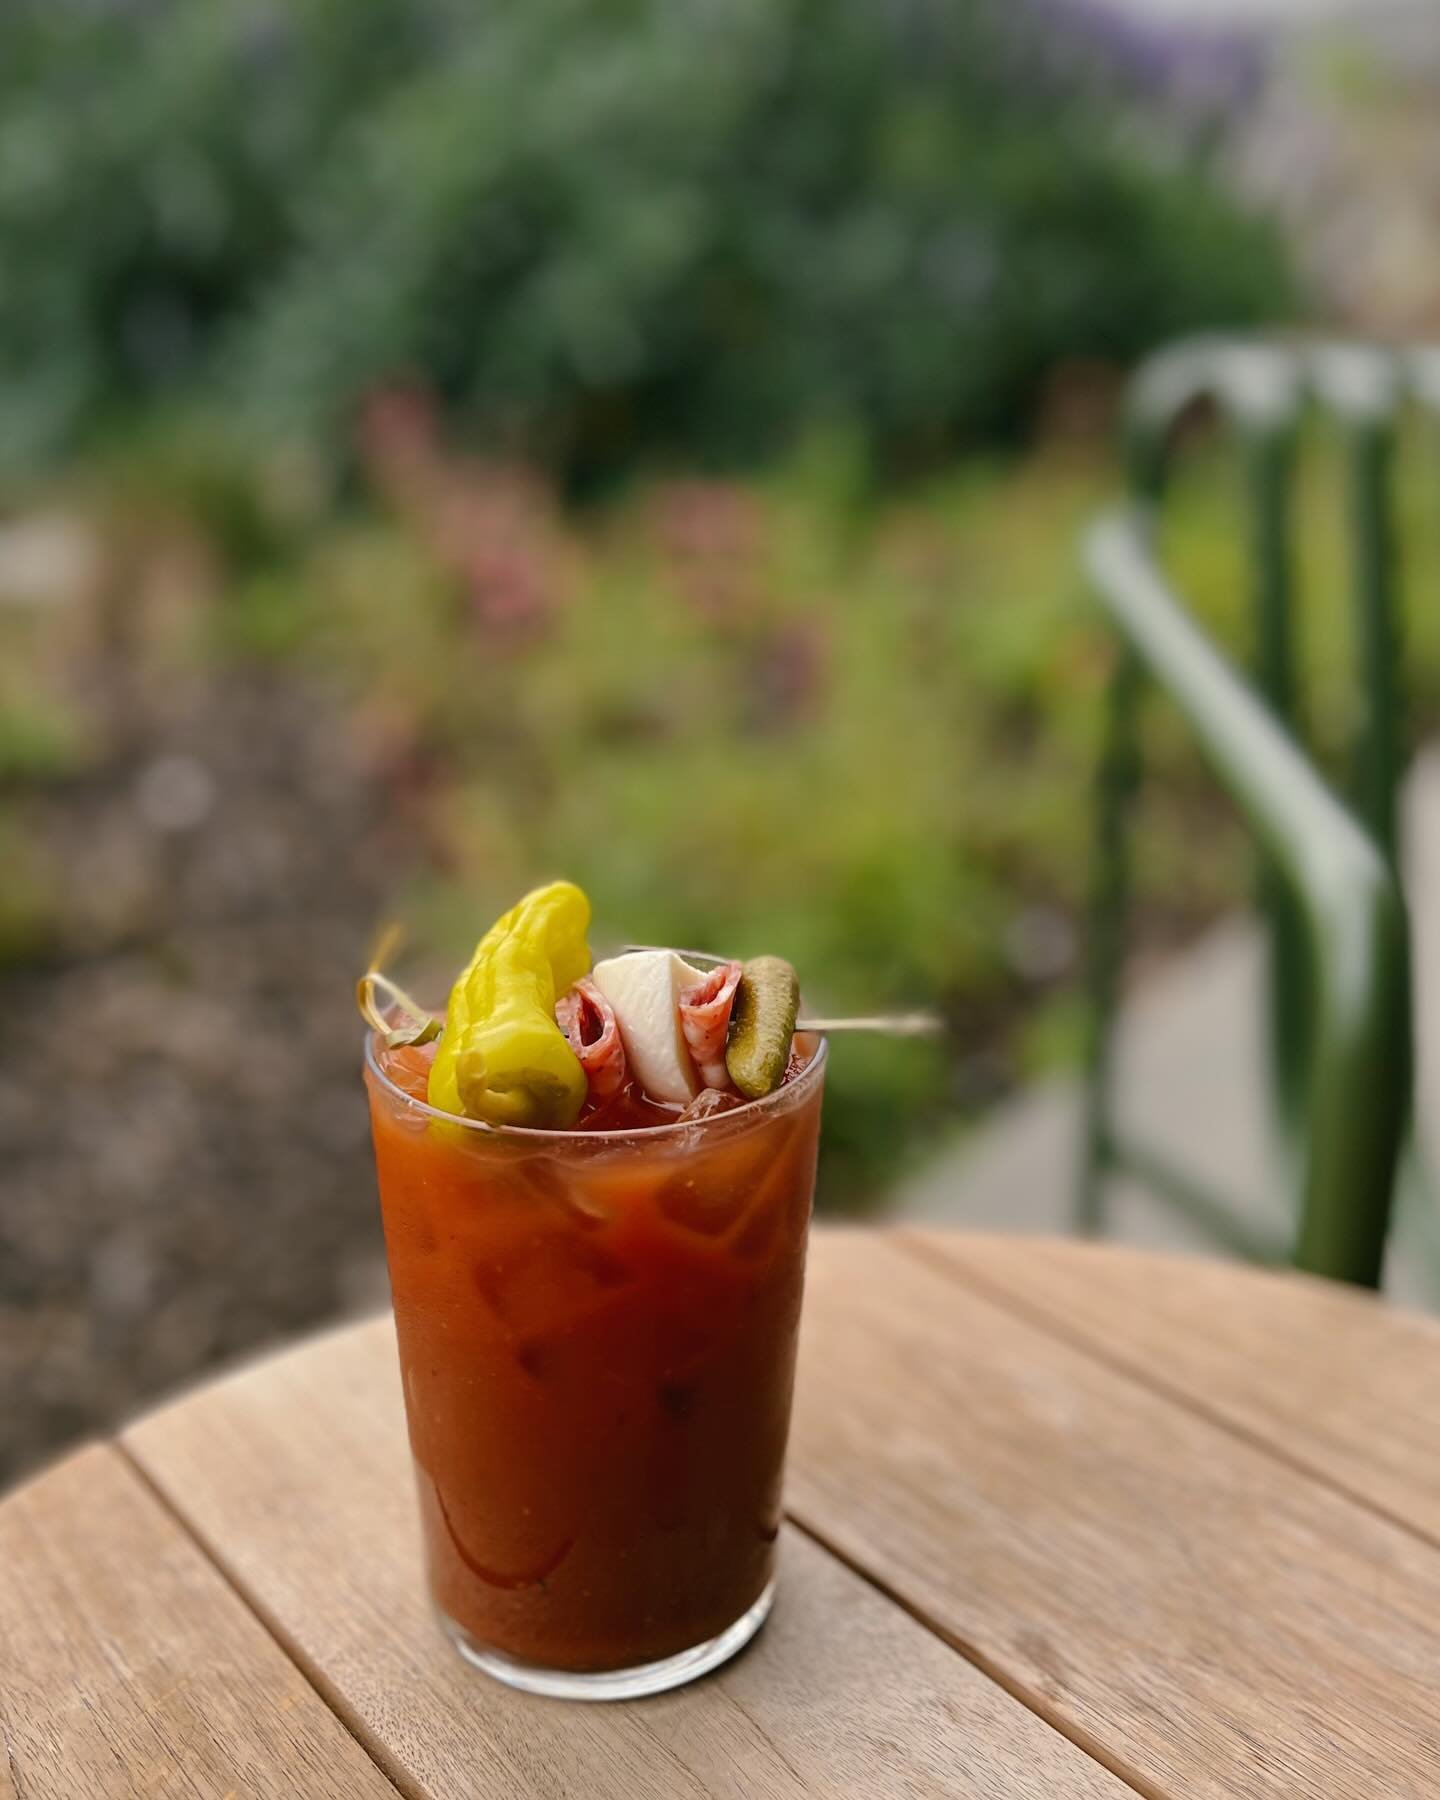 Treat yourself with our NEW Bloody Mary 🌶️ The perfect blend of tangy, spicy goodness.